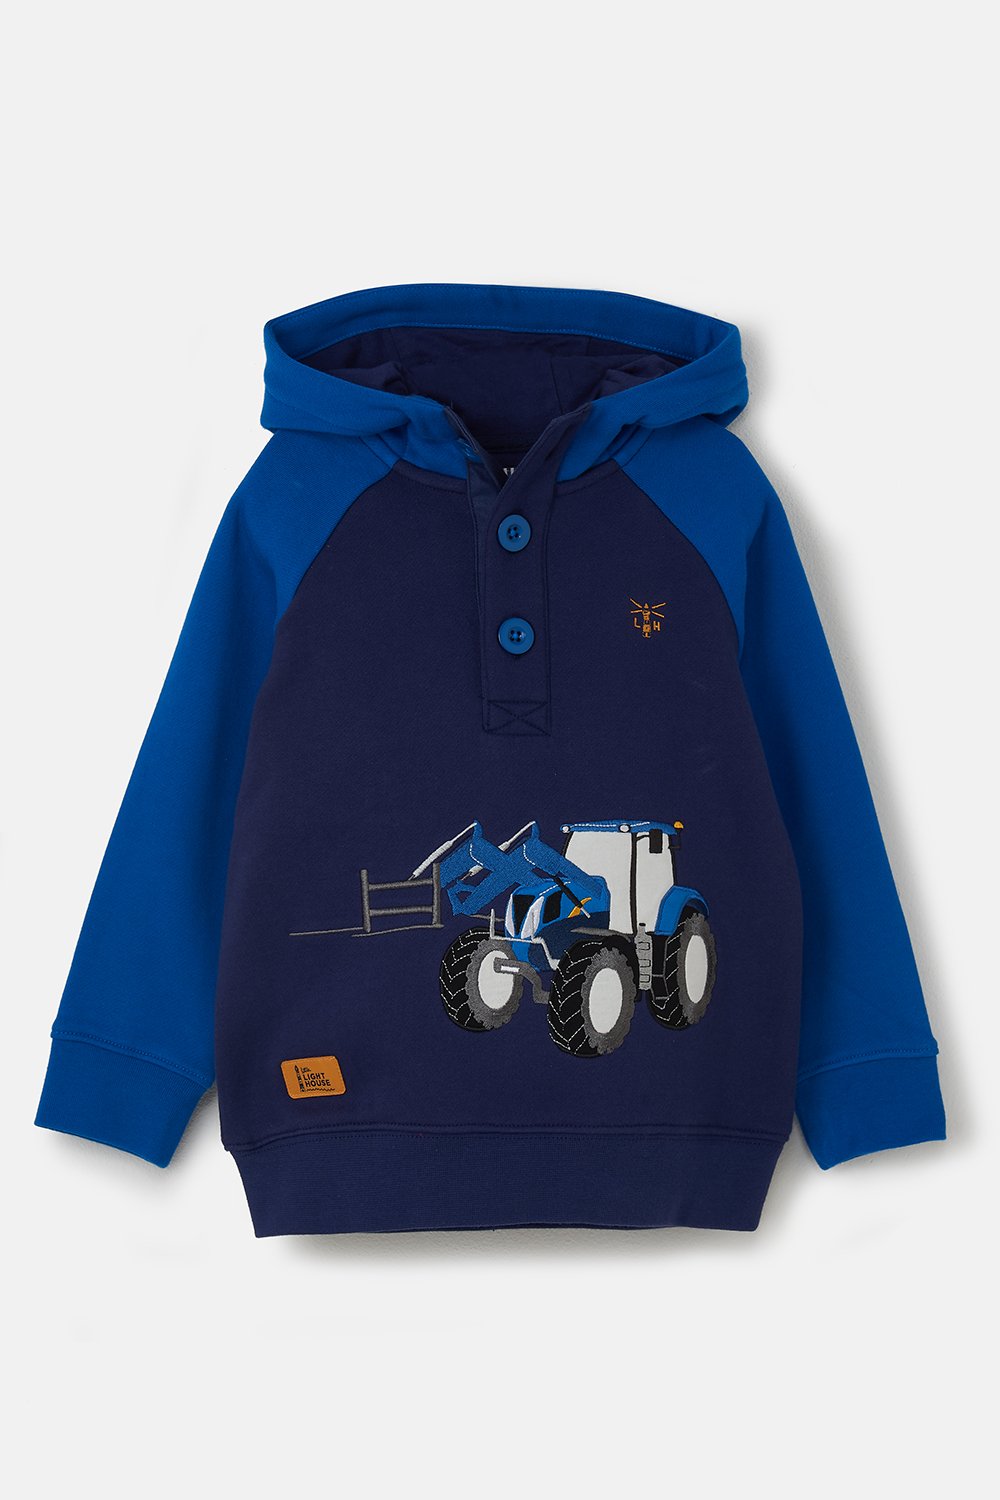 Lighthouse Jack Hoodie with Tractor Front Loader Applique  - Royal & Navy Blue